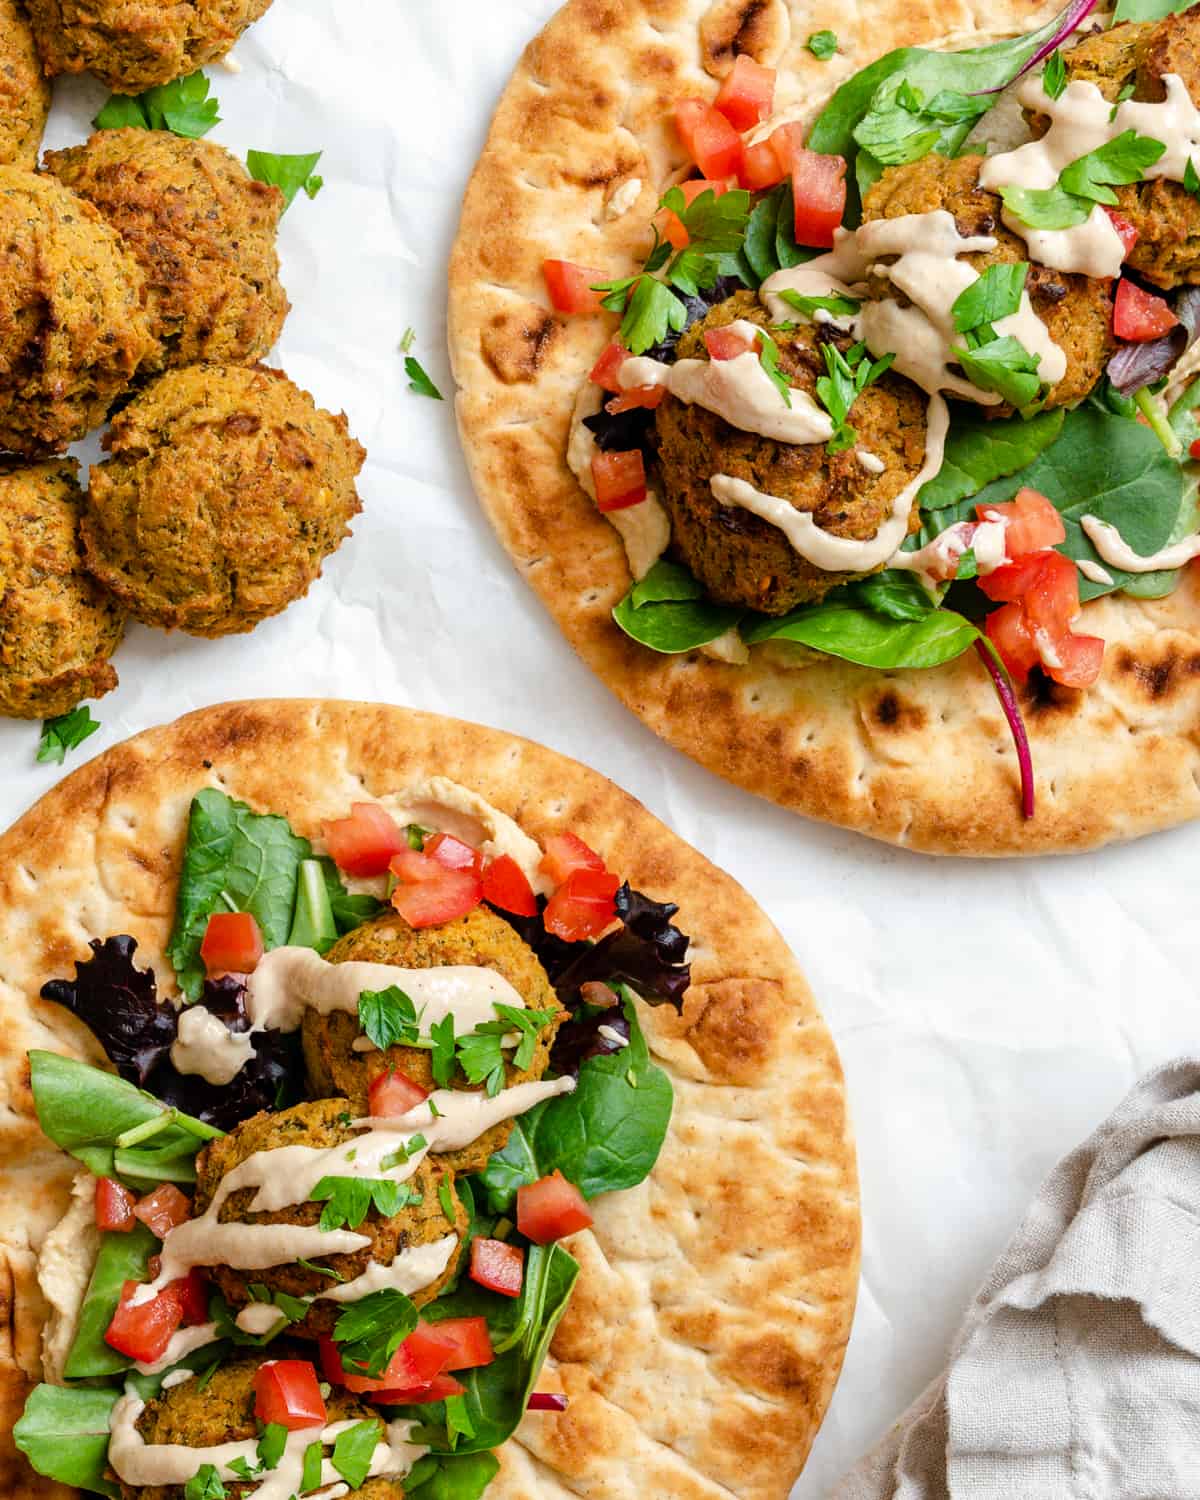 completed Healthy Baked Falafel on bread against a white background